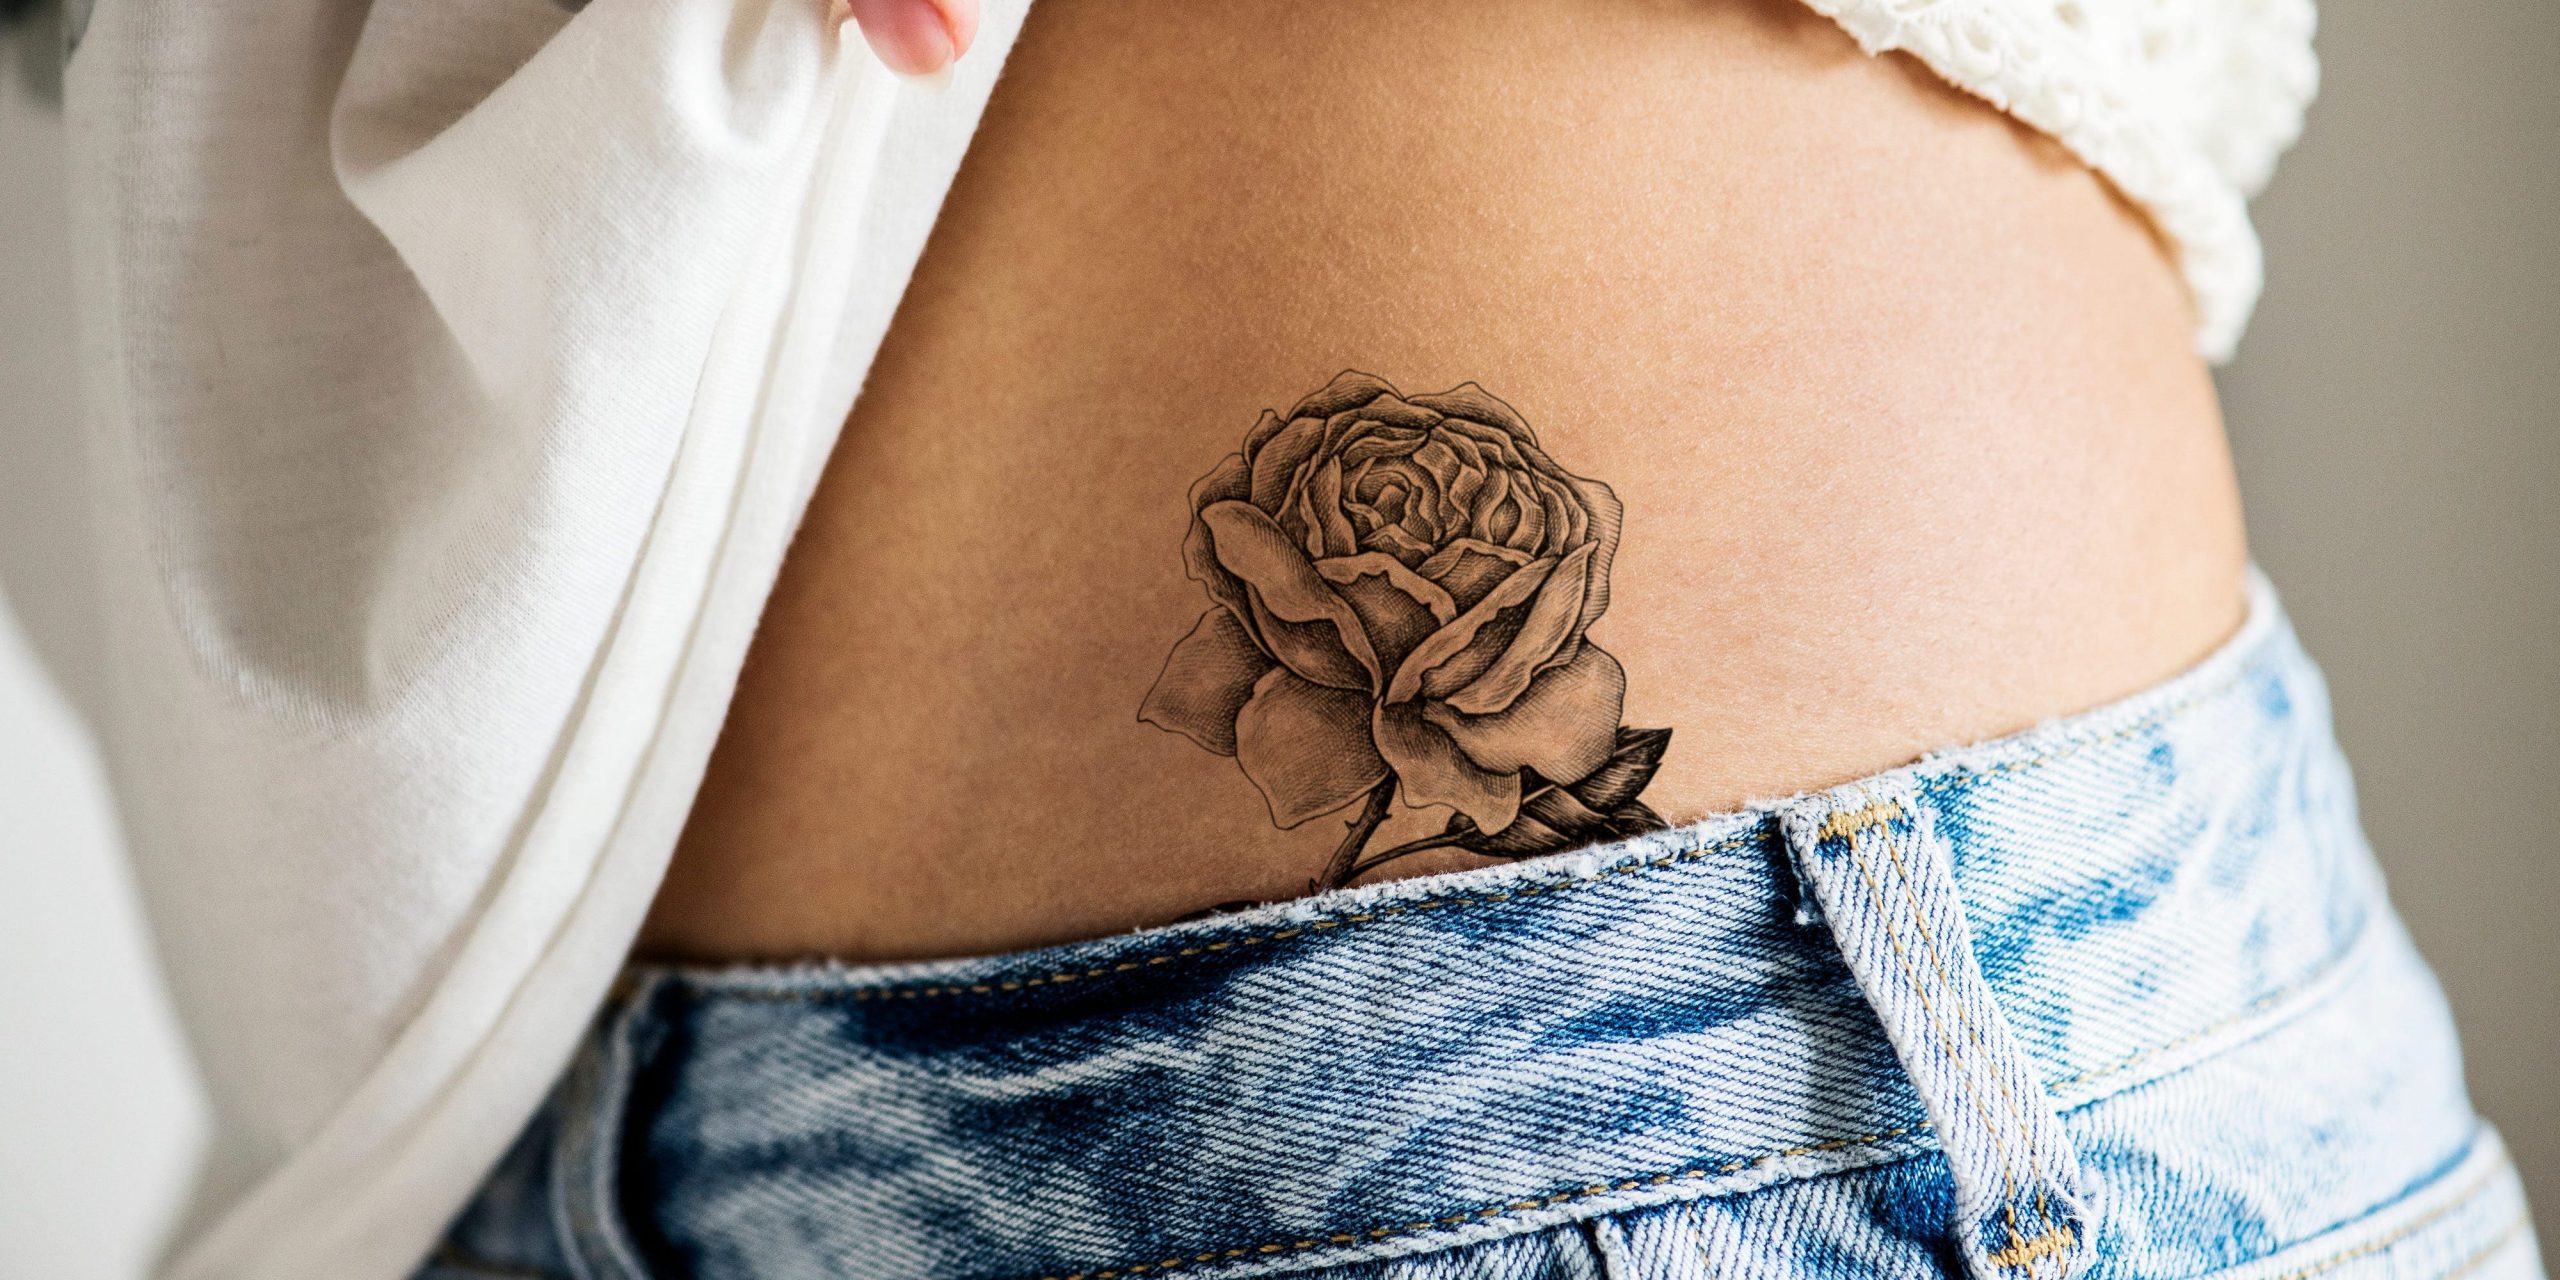 Tattoo Infection: How To Indentify And Prevent This Infection | OnlyMyHealth